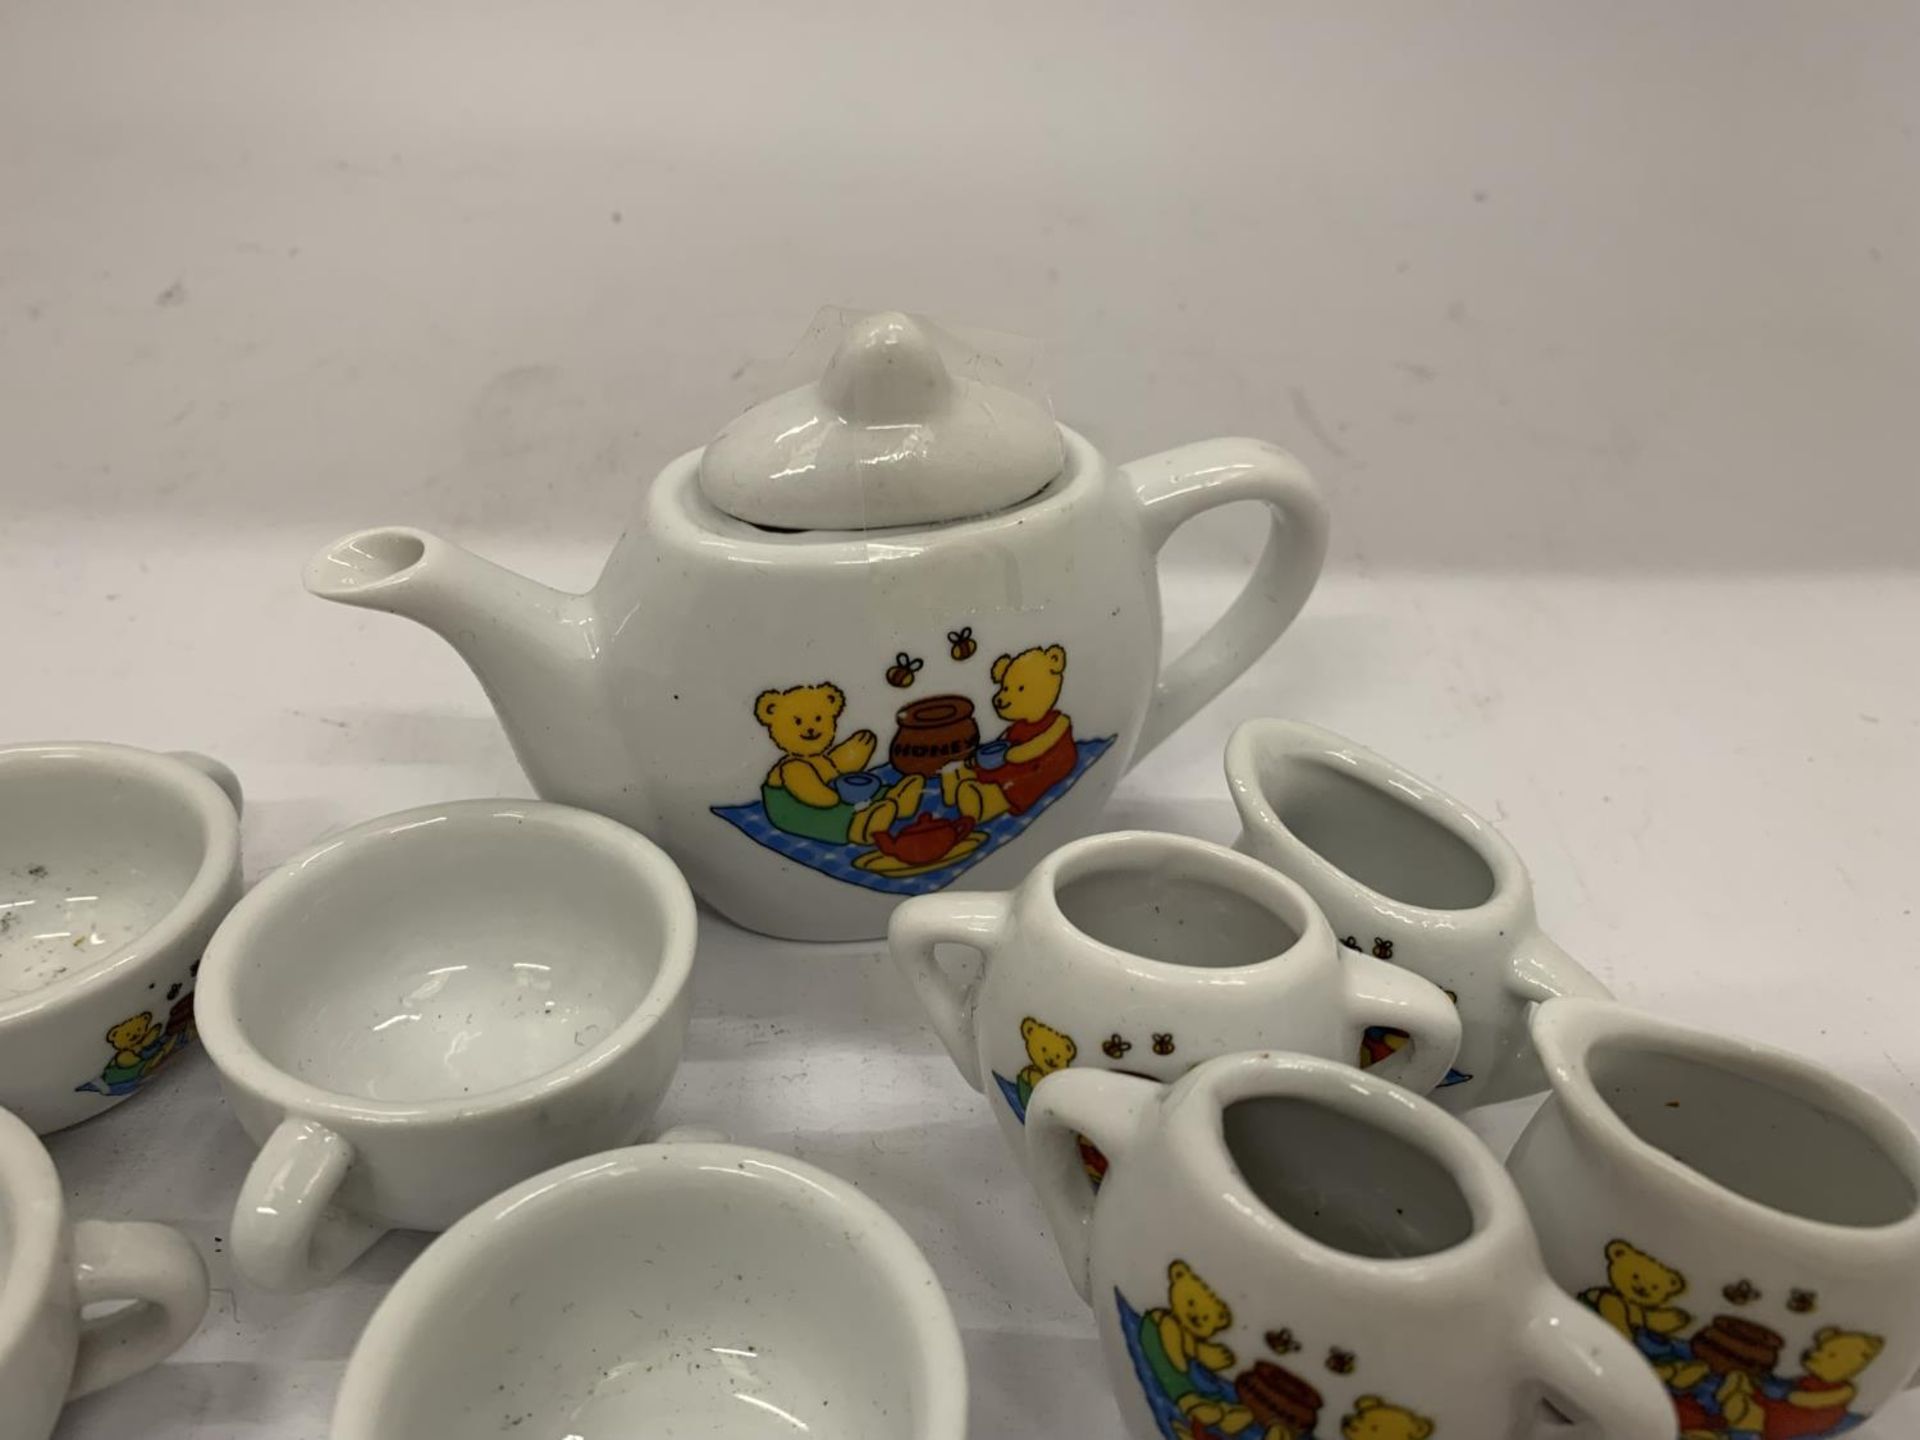 A MINIATURE CHILD'S POTTERY TEASET TO INCLUDE TEAPOT, JUGS, CUPS, ETC WITH A TEDDY BEARS PICNIC - Image 6 of 10